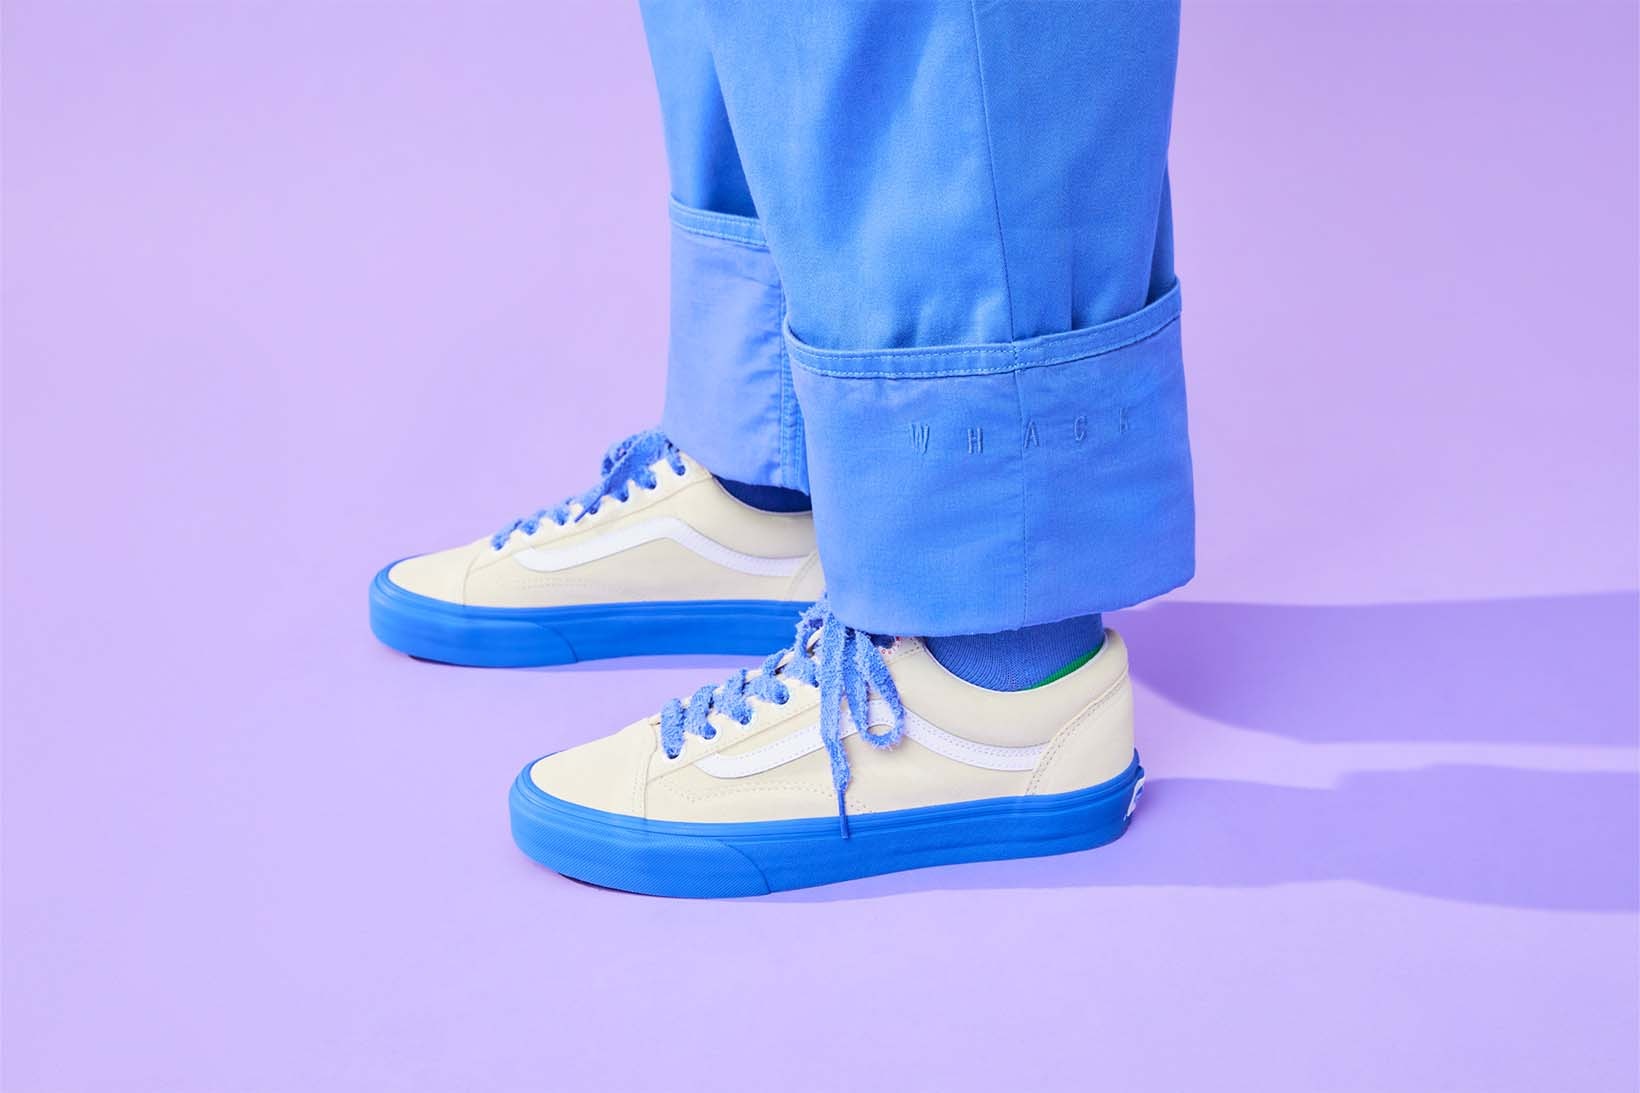 Vans Tierra Whack Style 36 White Blue Sneaker Chinos Collaboration Release Date